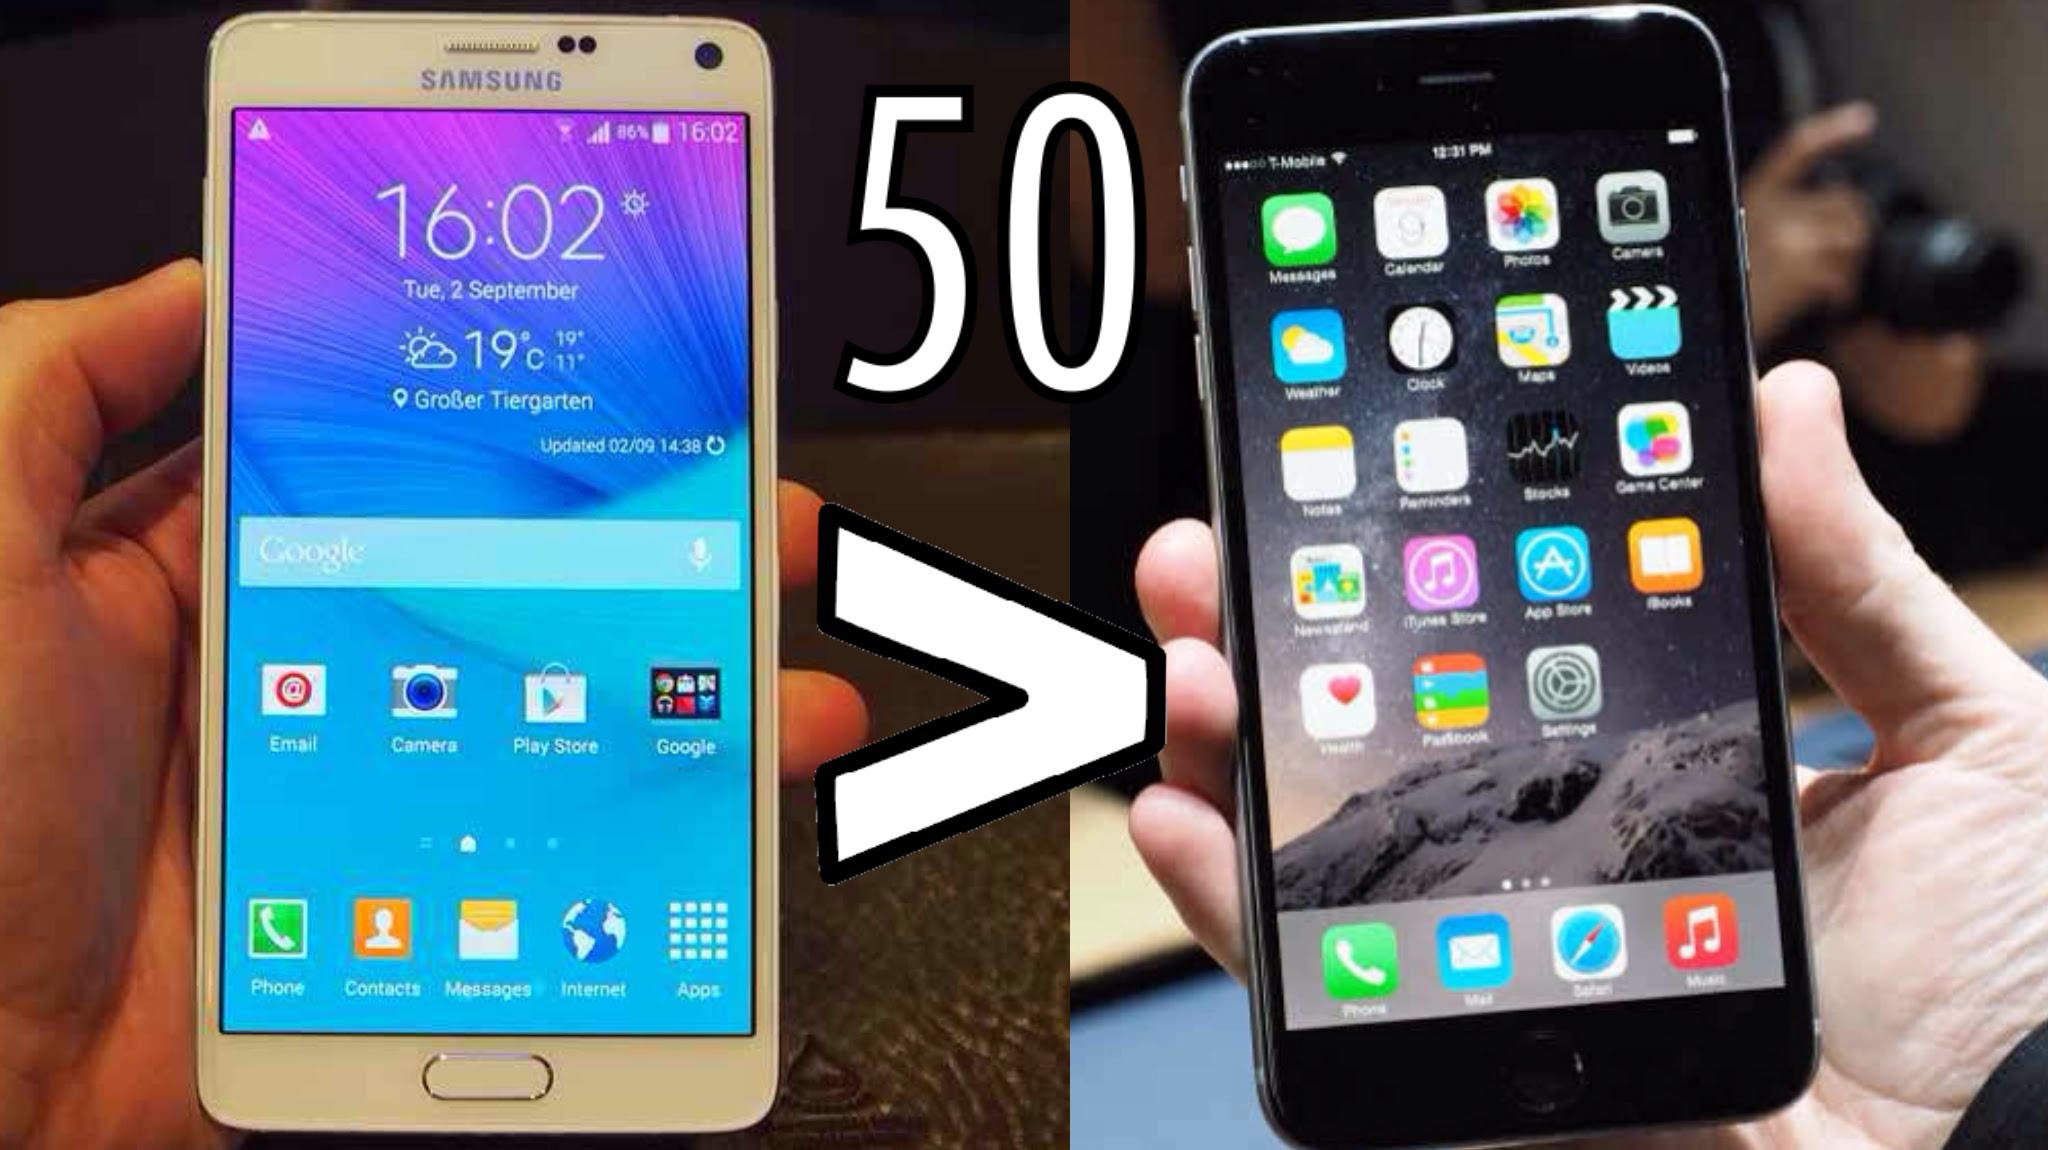 Samsung Galaxy Note 5 vs iPhone 6 Plus – Same Screen Size, But 